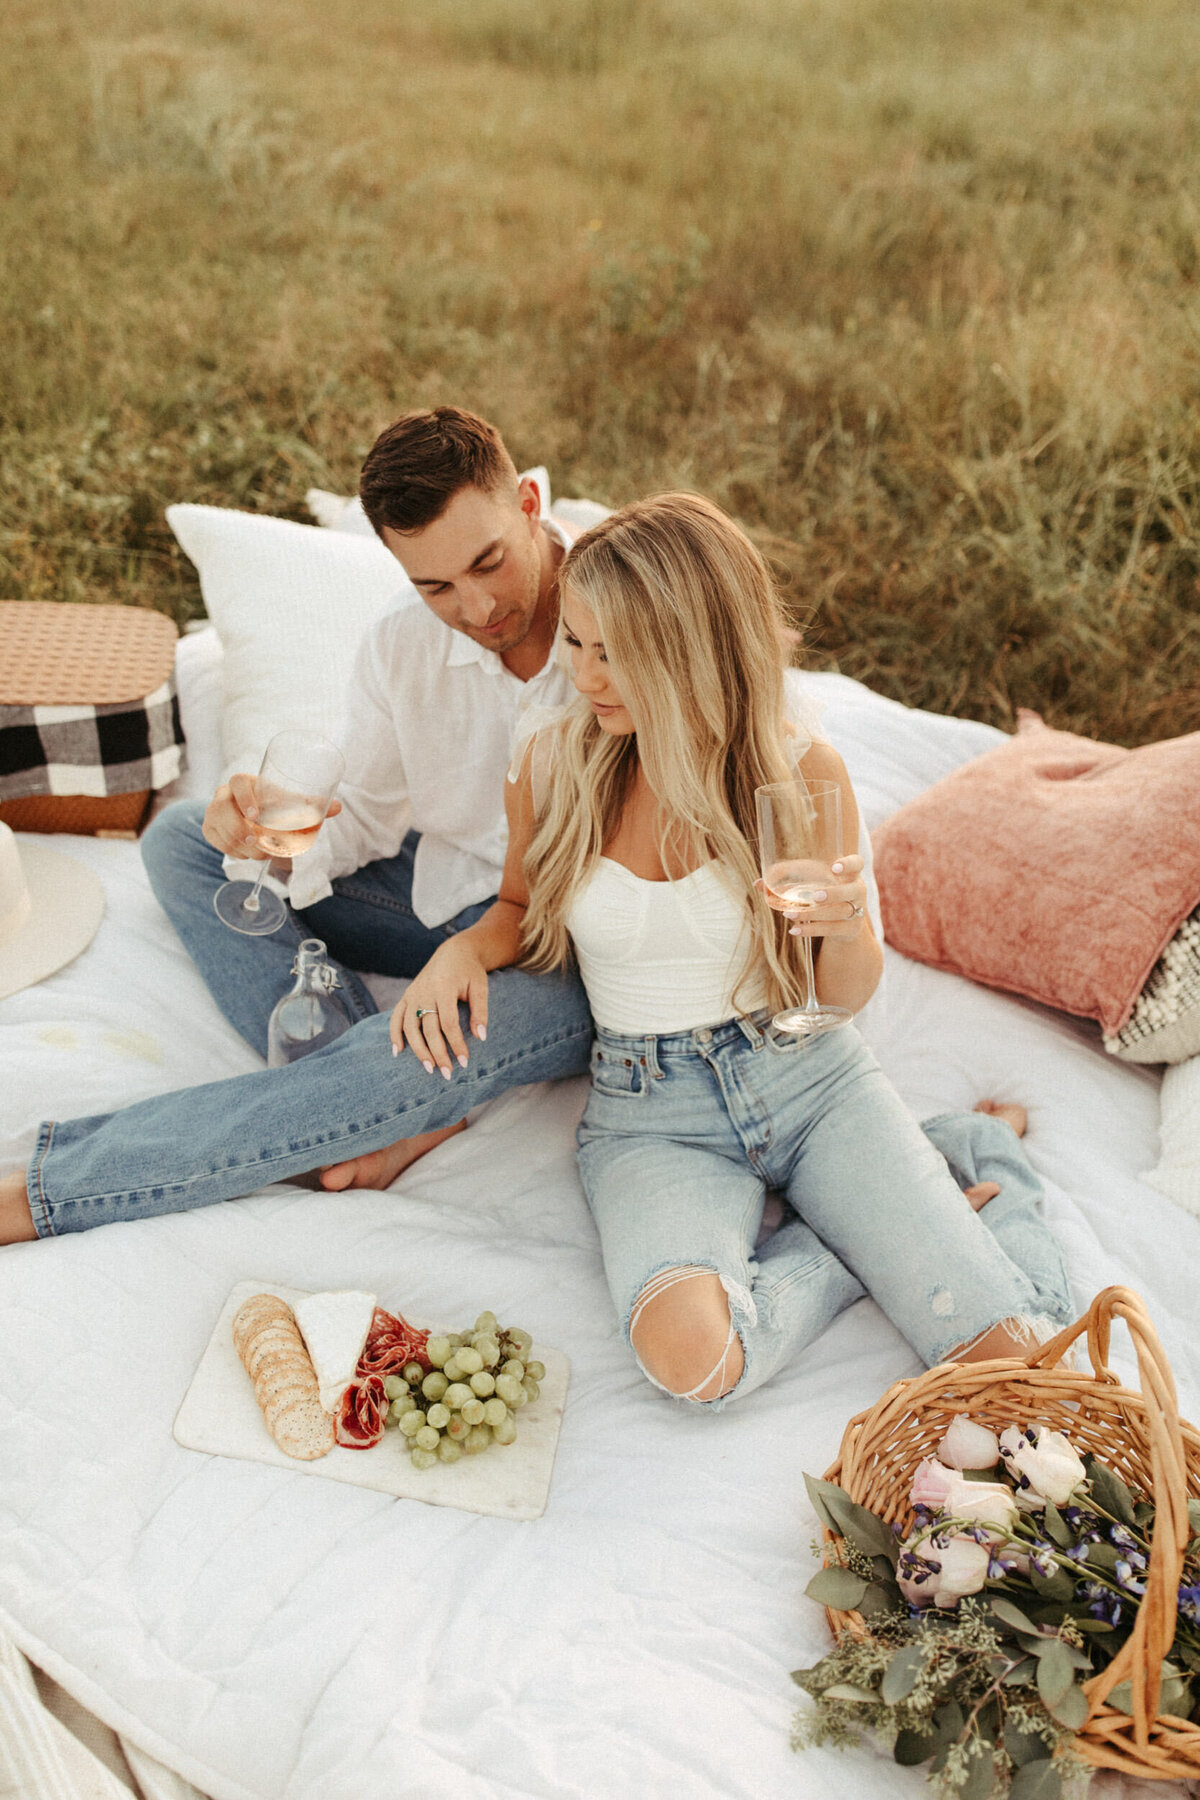 A guy and a girl wearing white shirts and washed denim blue jeans are holding champagne glasses and sitting down on a picnic blanket with a charcuterie board and basket full of flowers next to them,